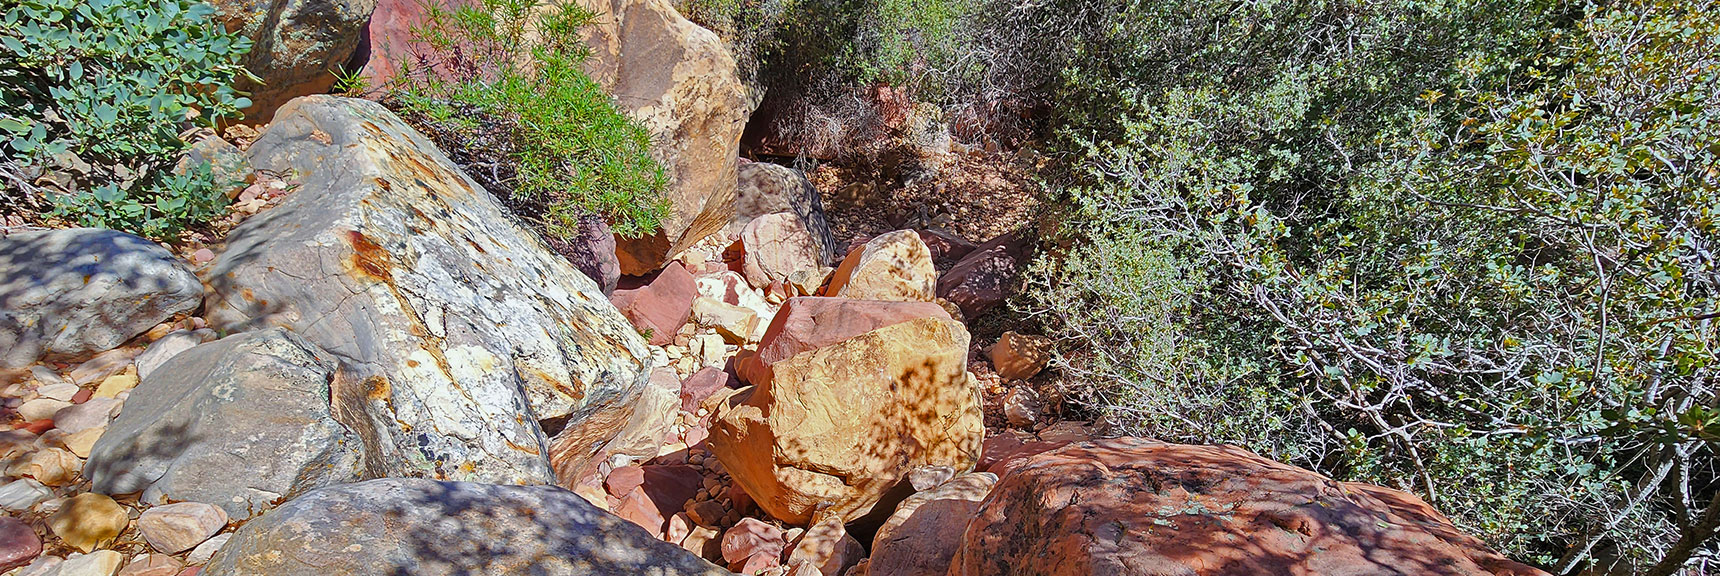 More Boulders and Ledges to Navigate Through This Stretch | Juniper Canyon | Red Rock Canyon National Conservation Area, Nevada | David Smith | LasVegasAreaTrails.com